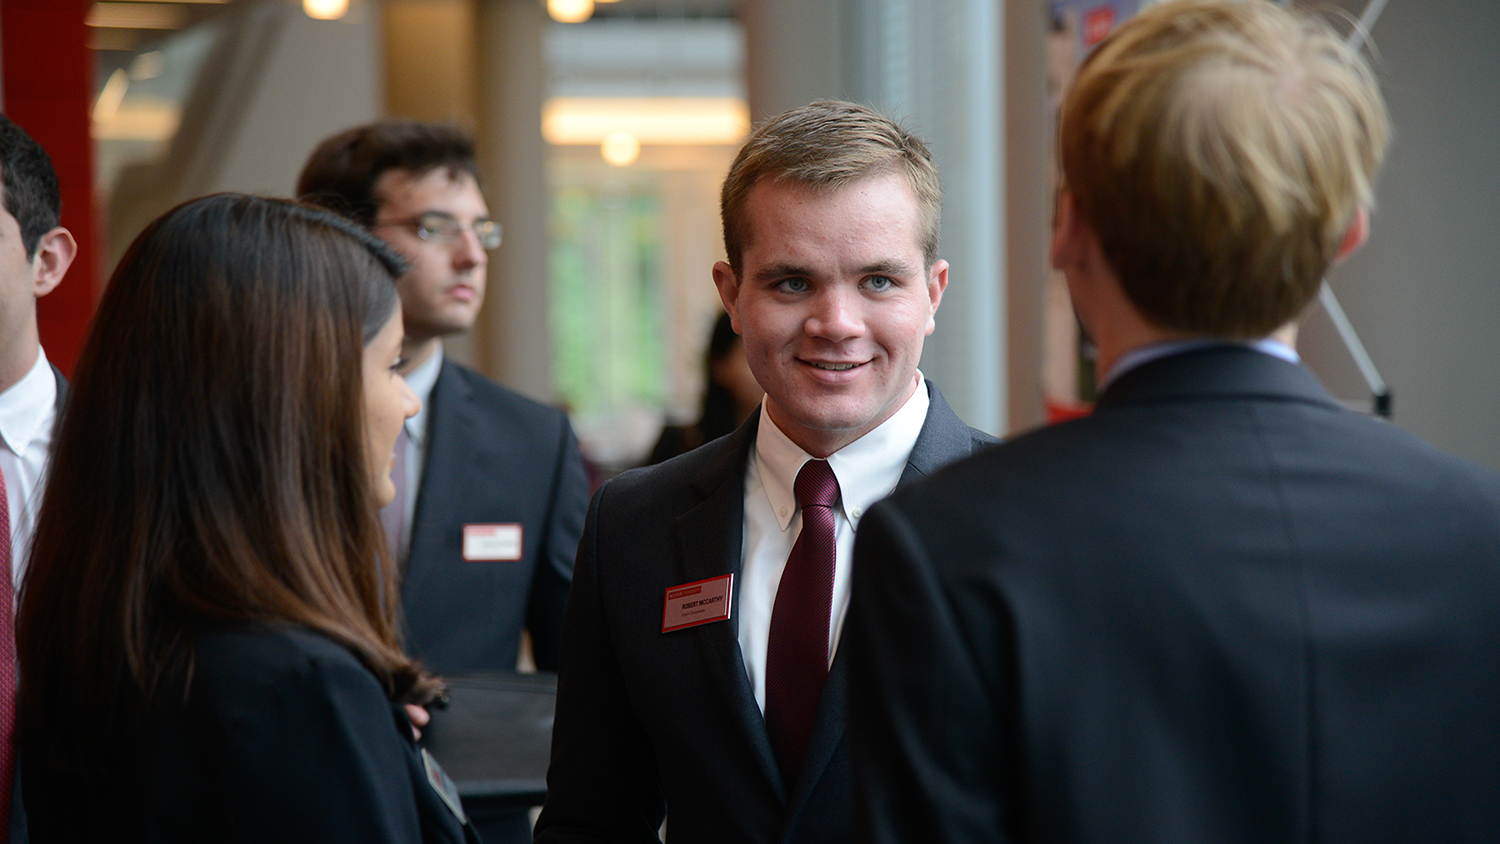 NC State students networking with other students